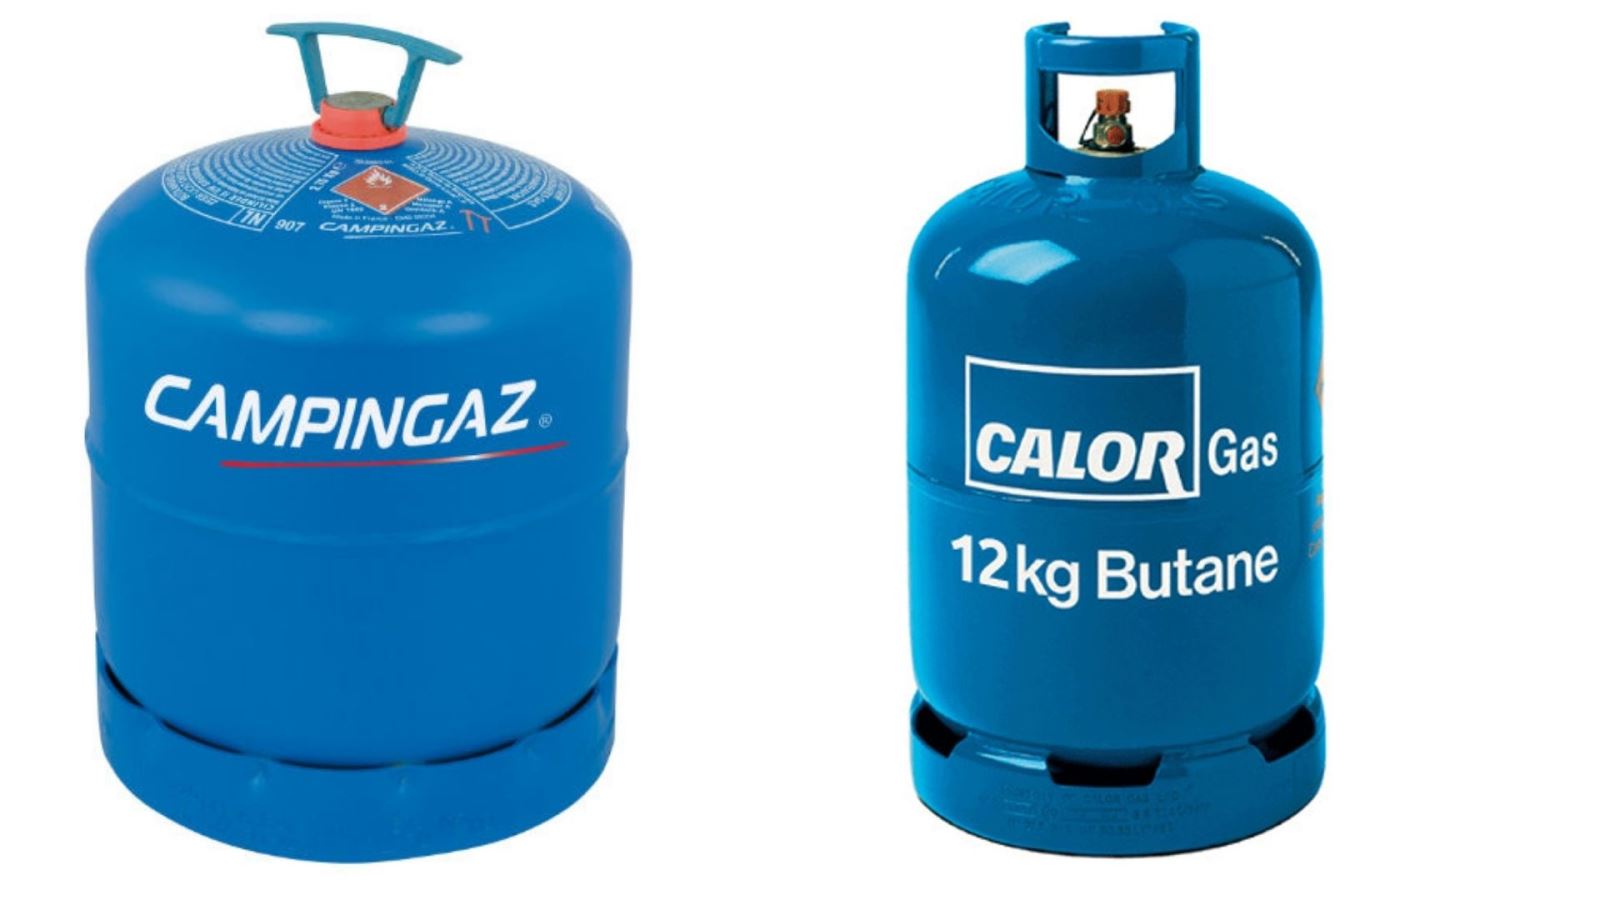 Refillable gas cylinders